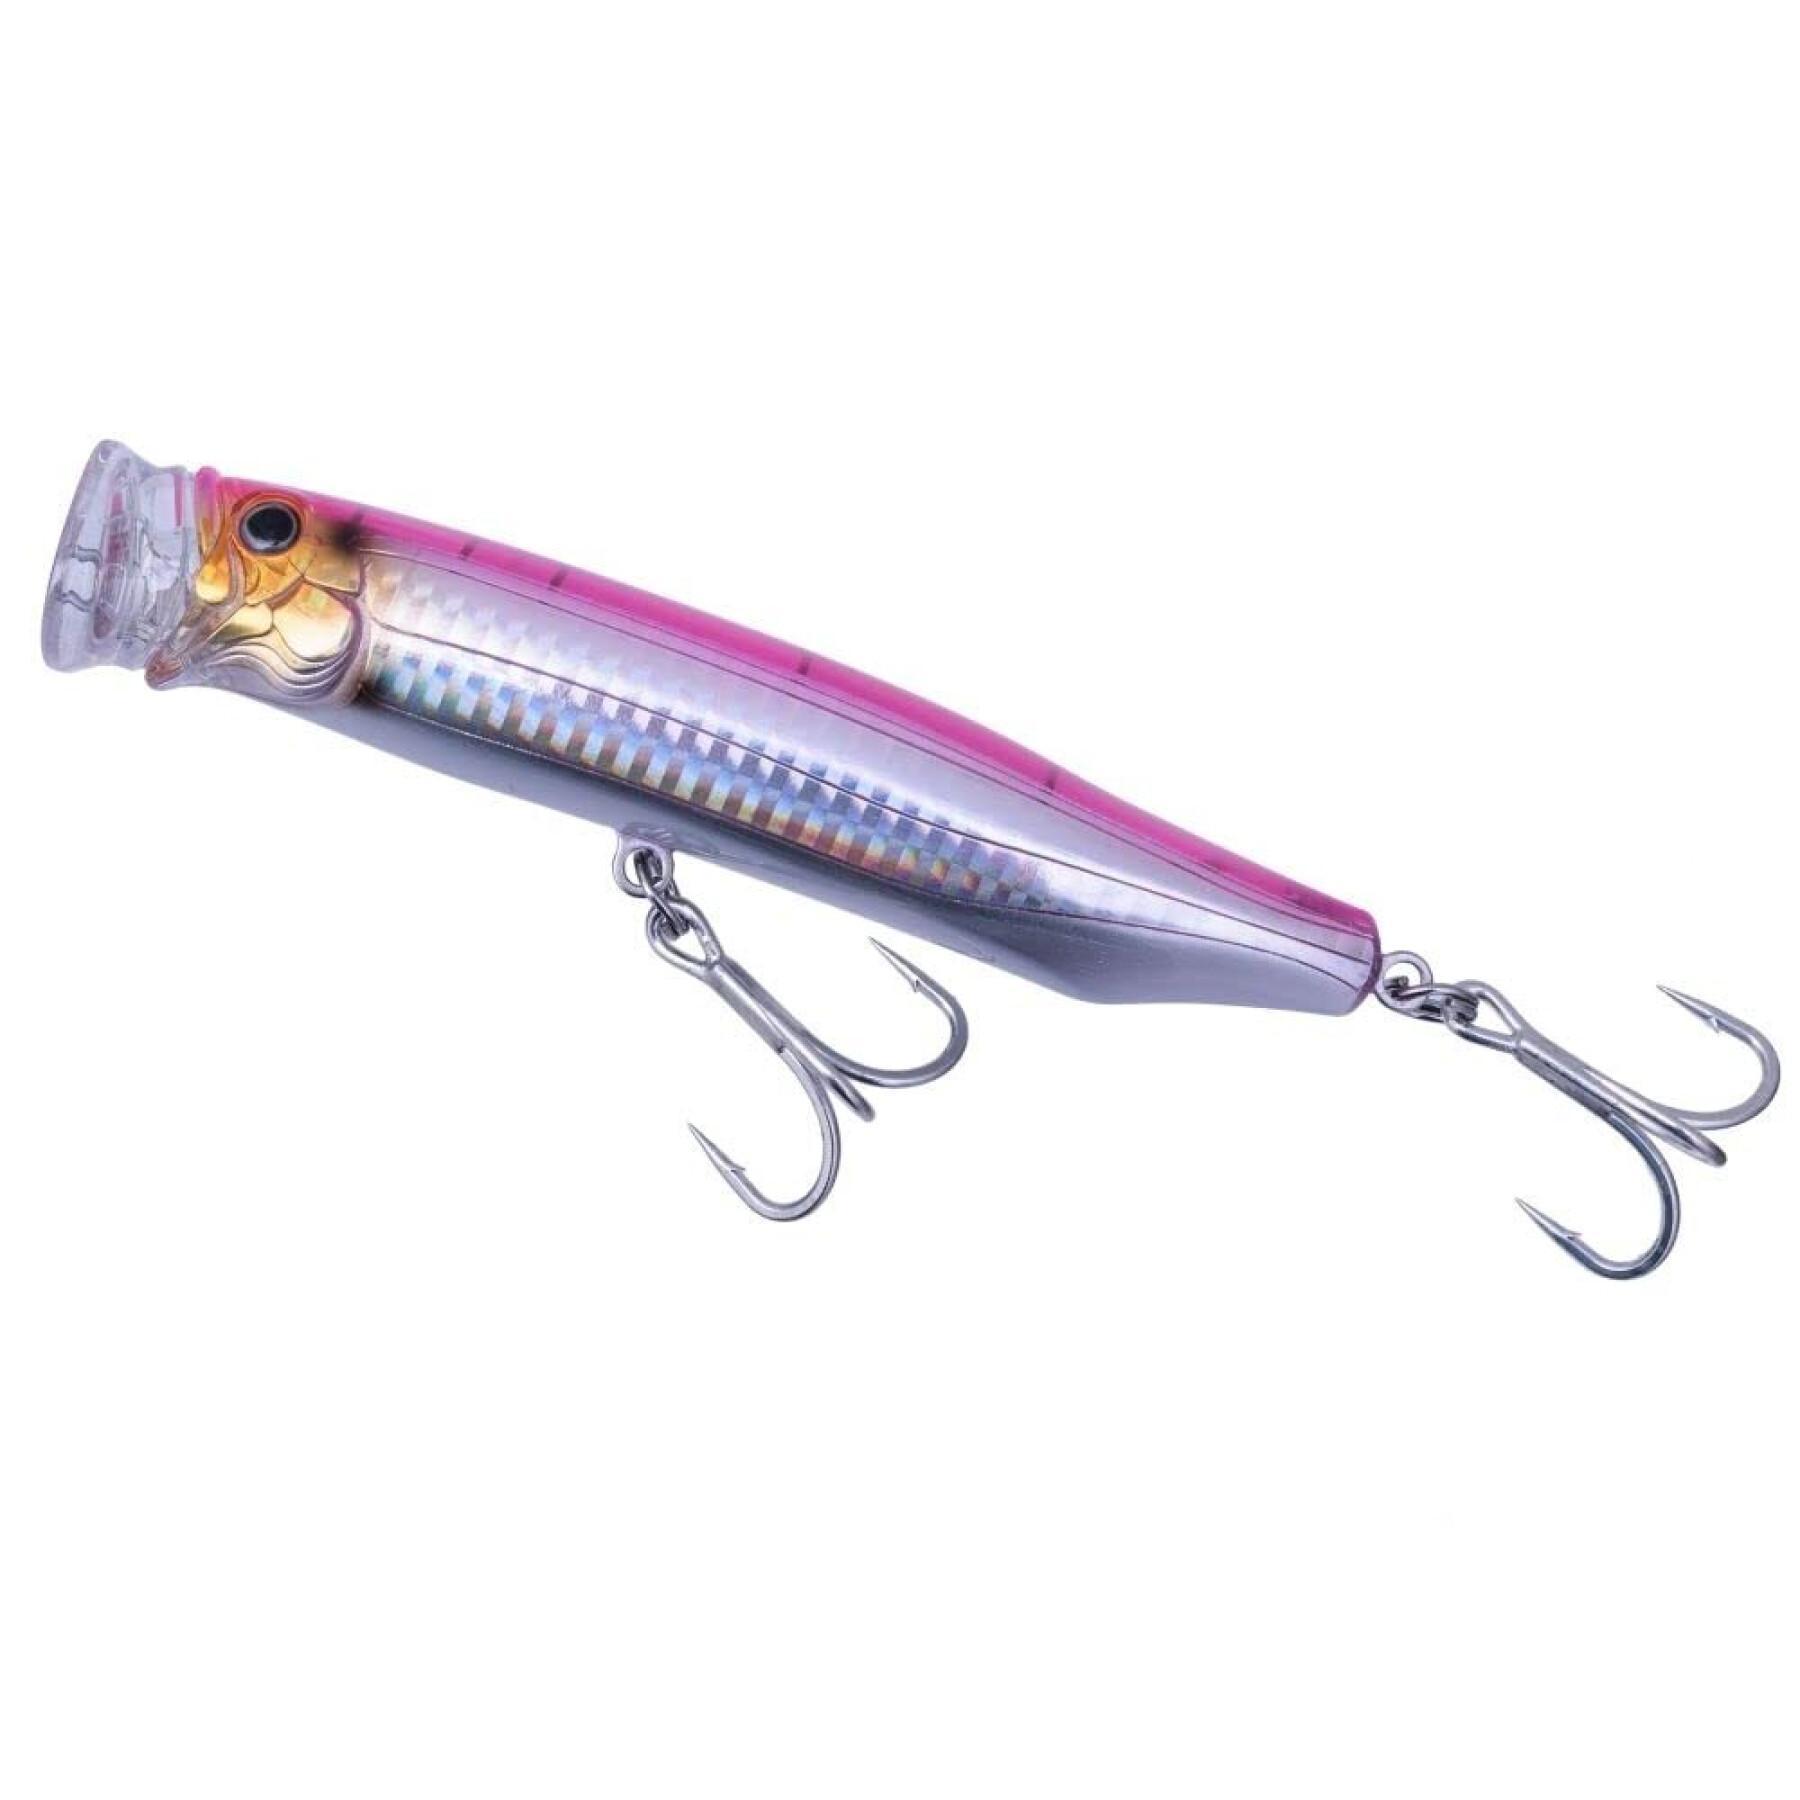 House feed popper tackle 135 - 45g